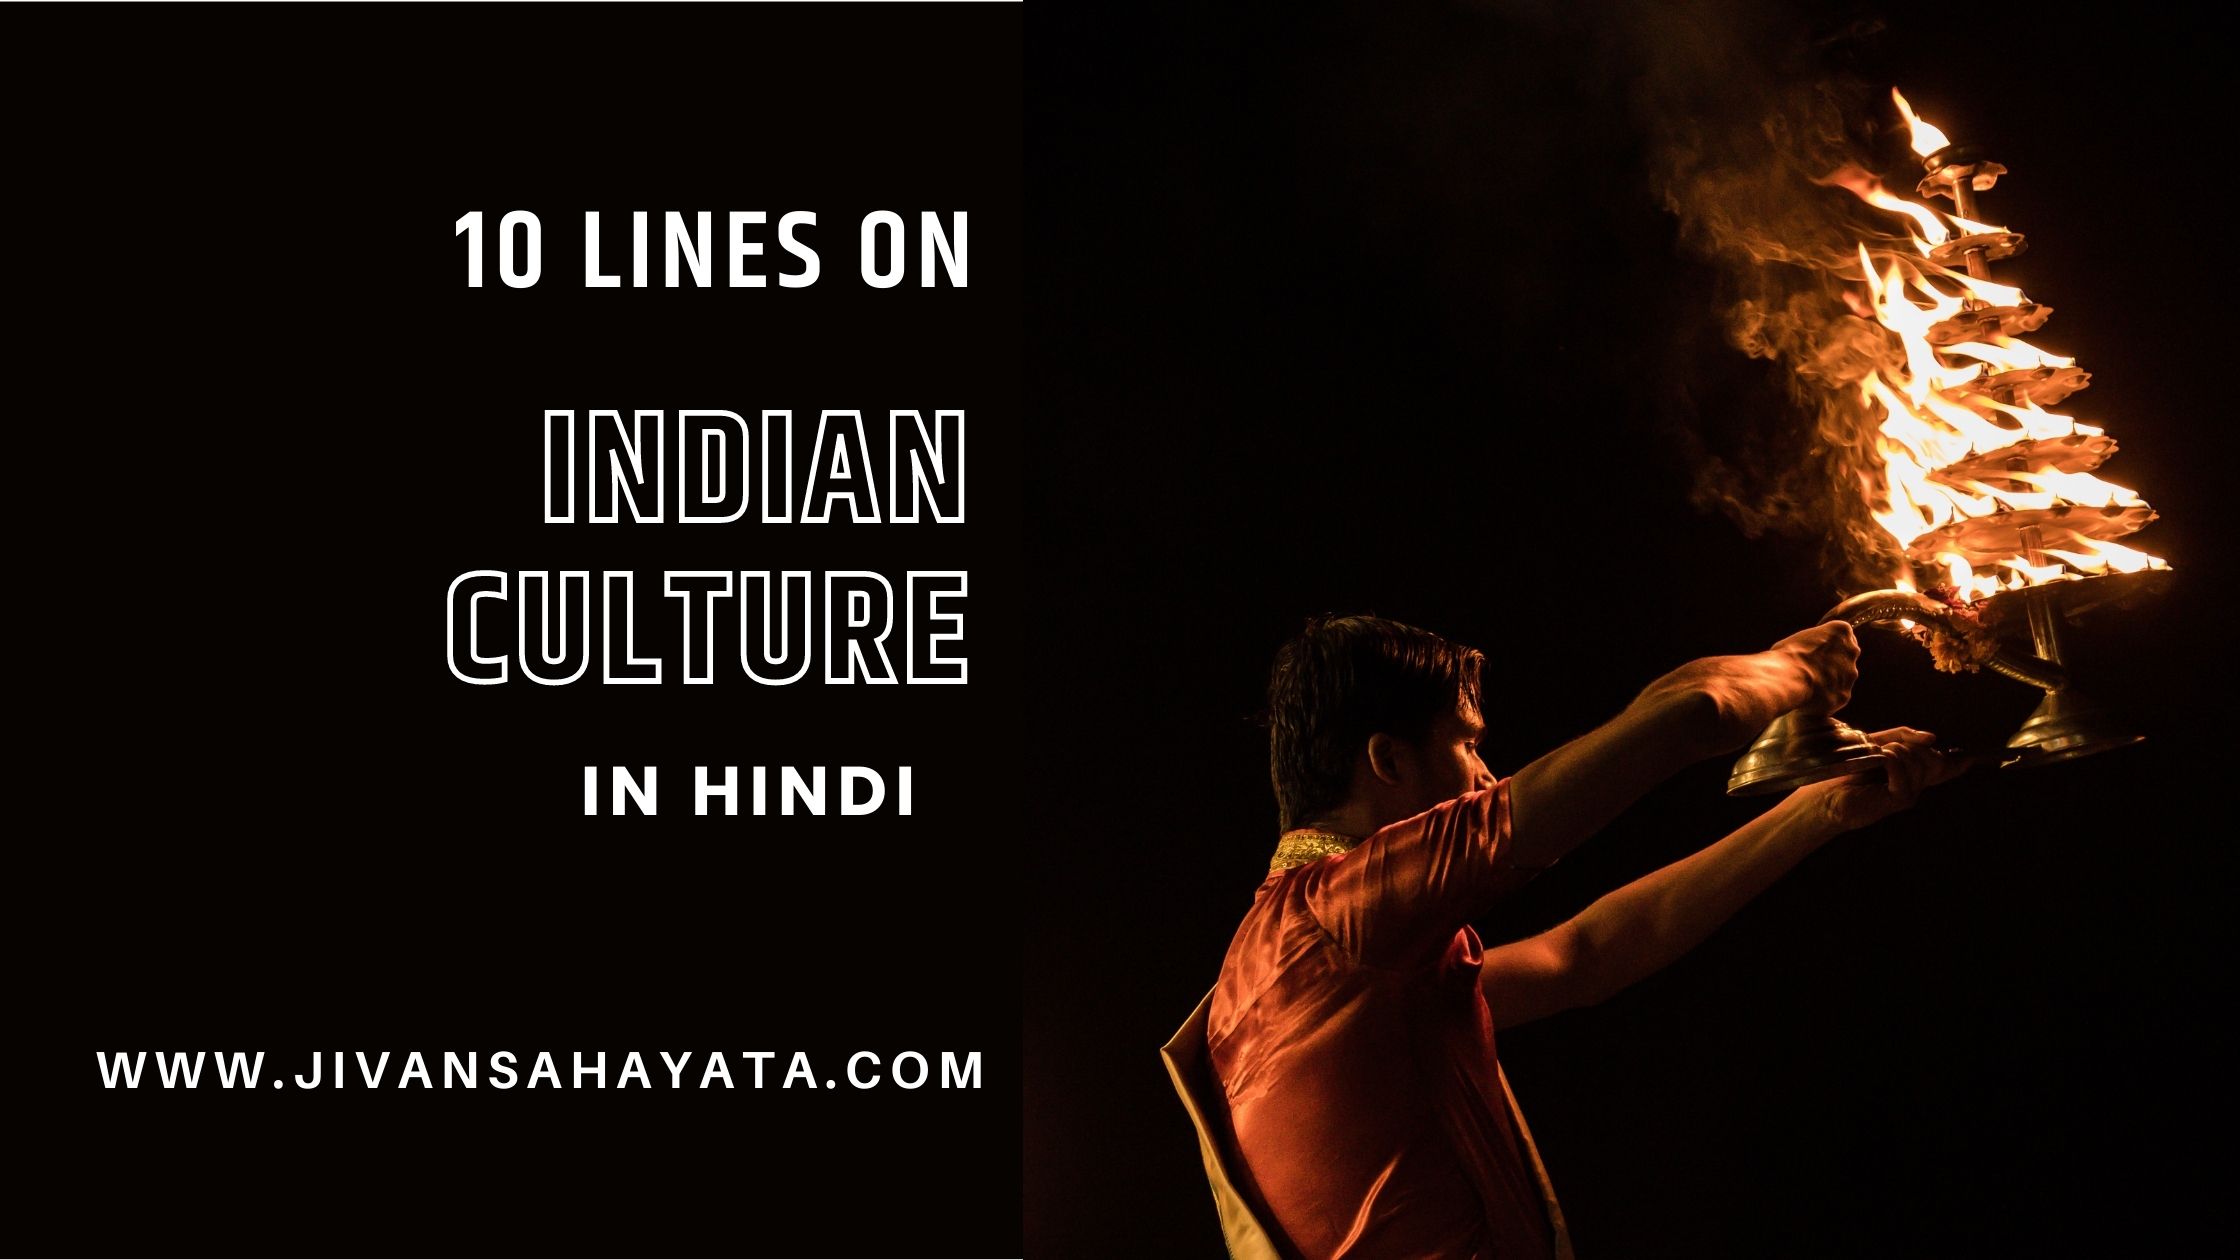 10 lines on Indian culture in Hindi